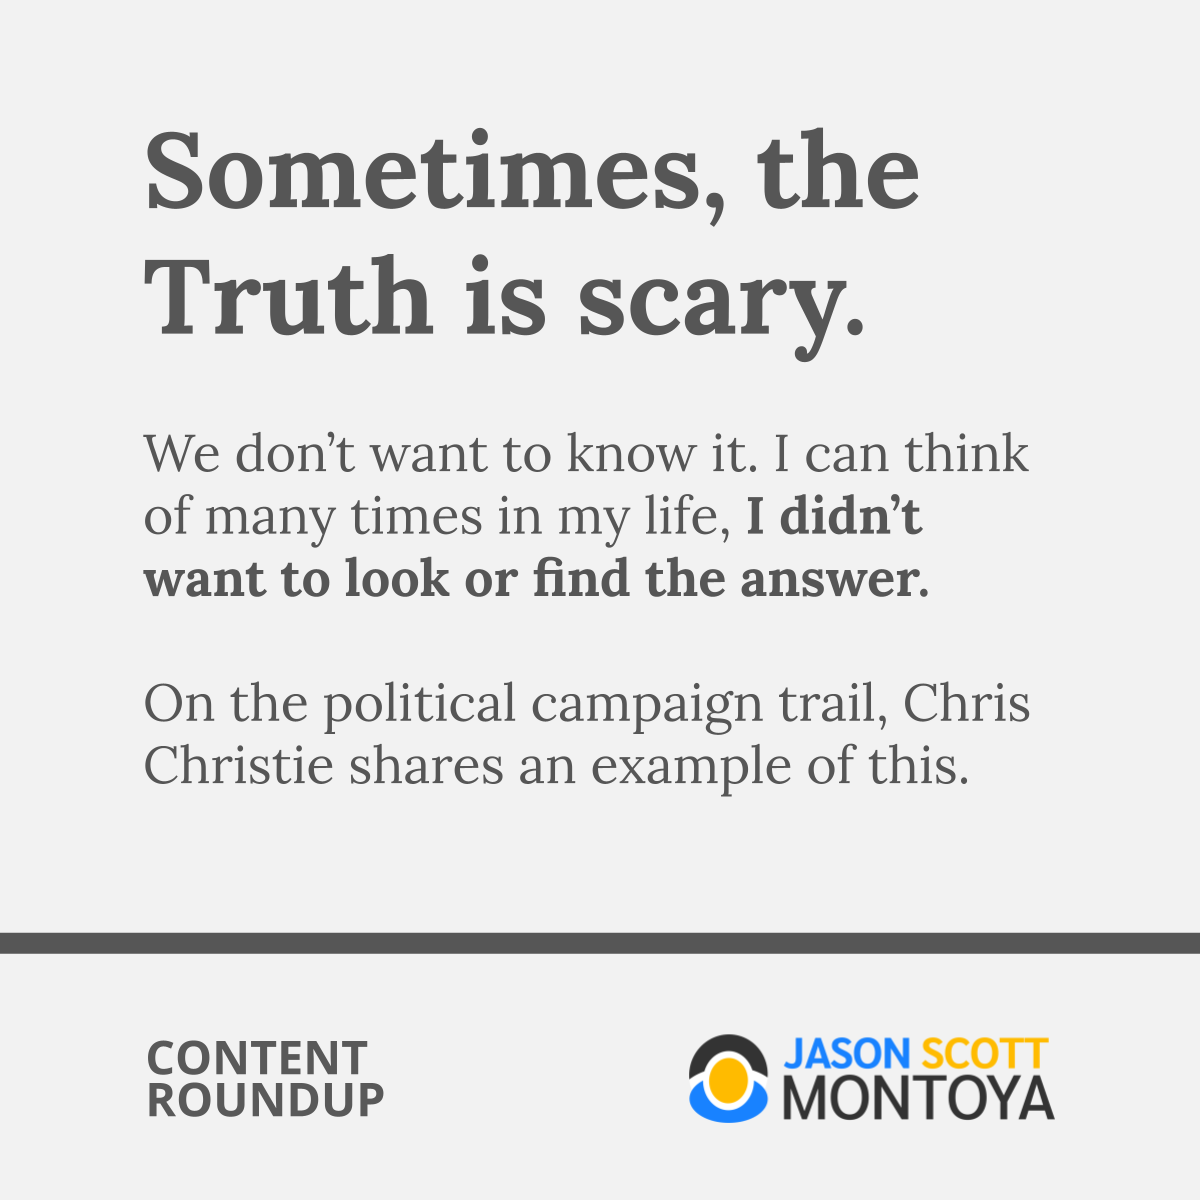 Sometimes, the Truth is scary.  We don’t want to know it. I can think of many times in my life, I didn’t want to look or find the answer.  On the political campaign trail, Chris Christie shares an example of this.